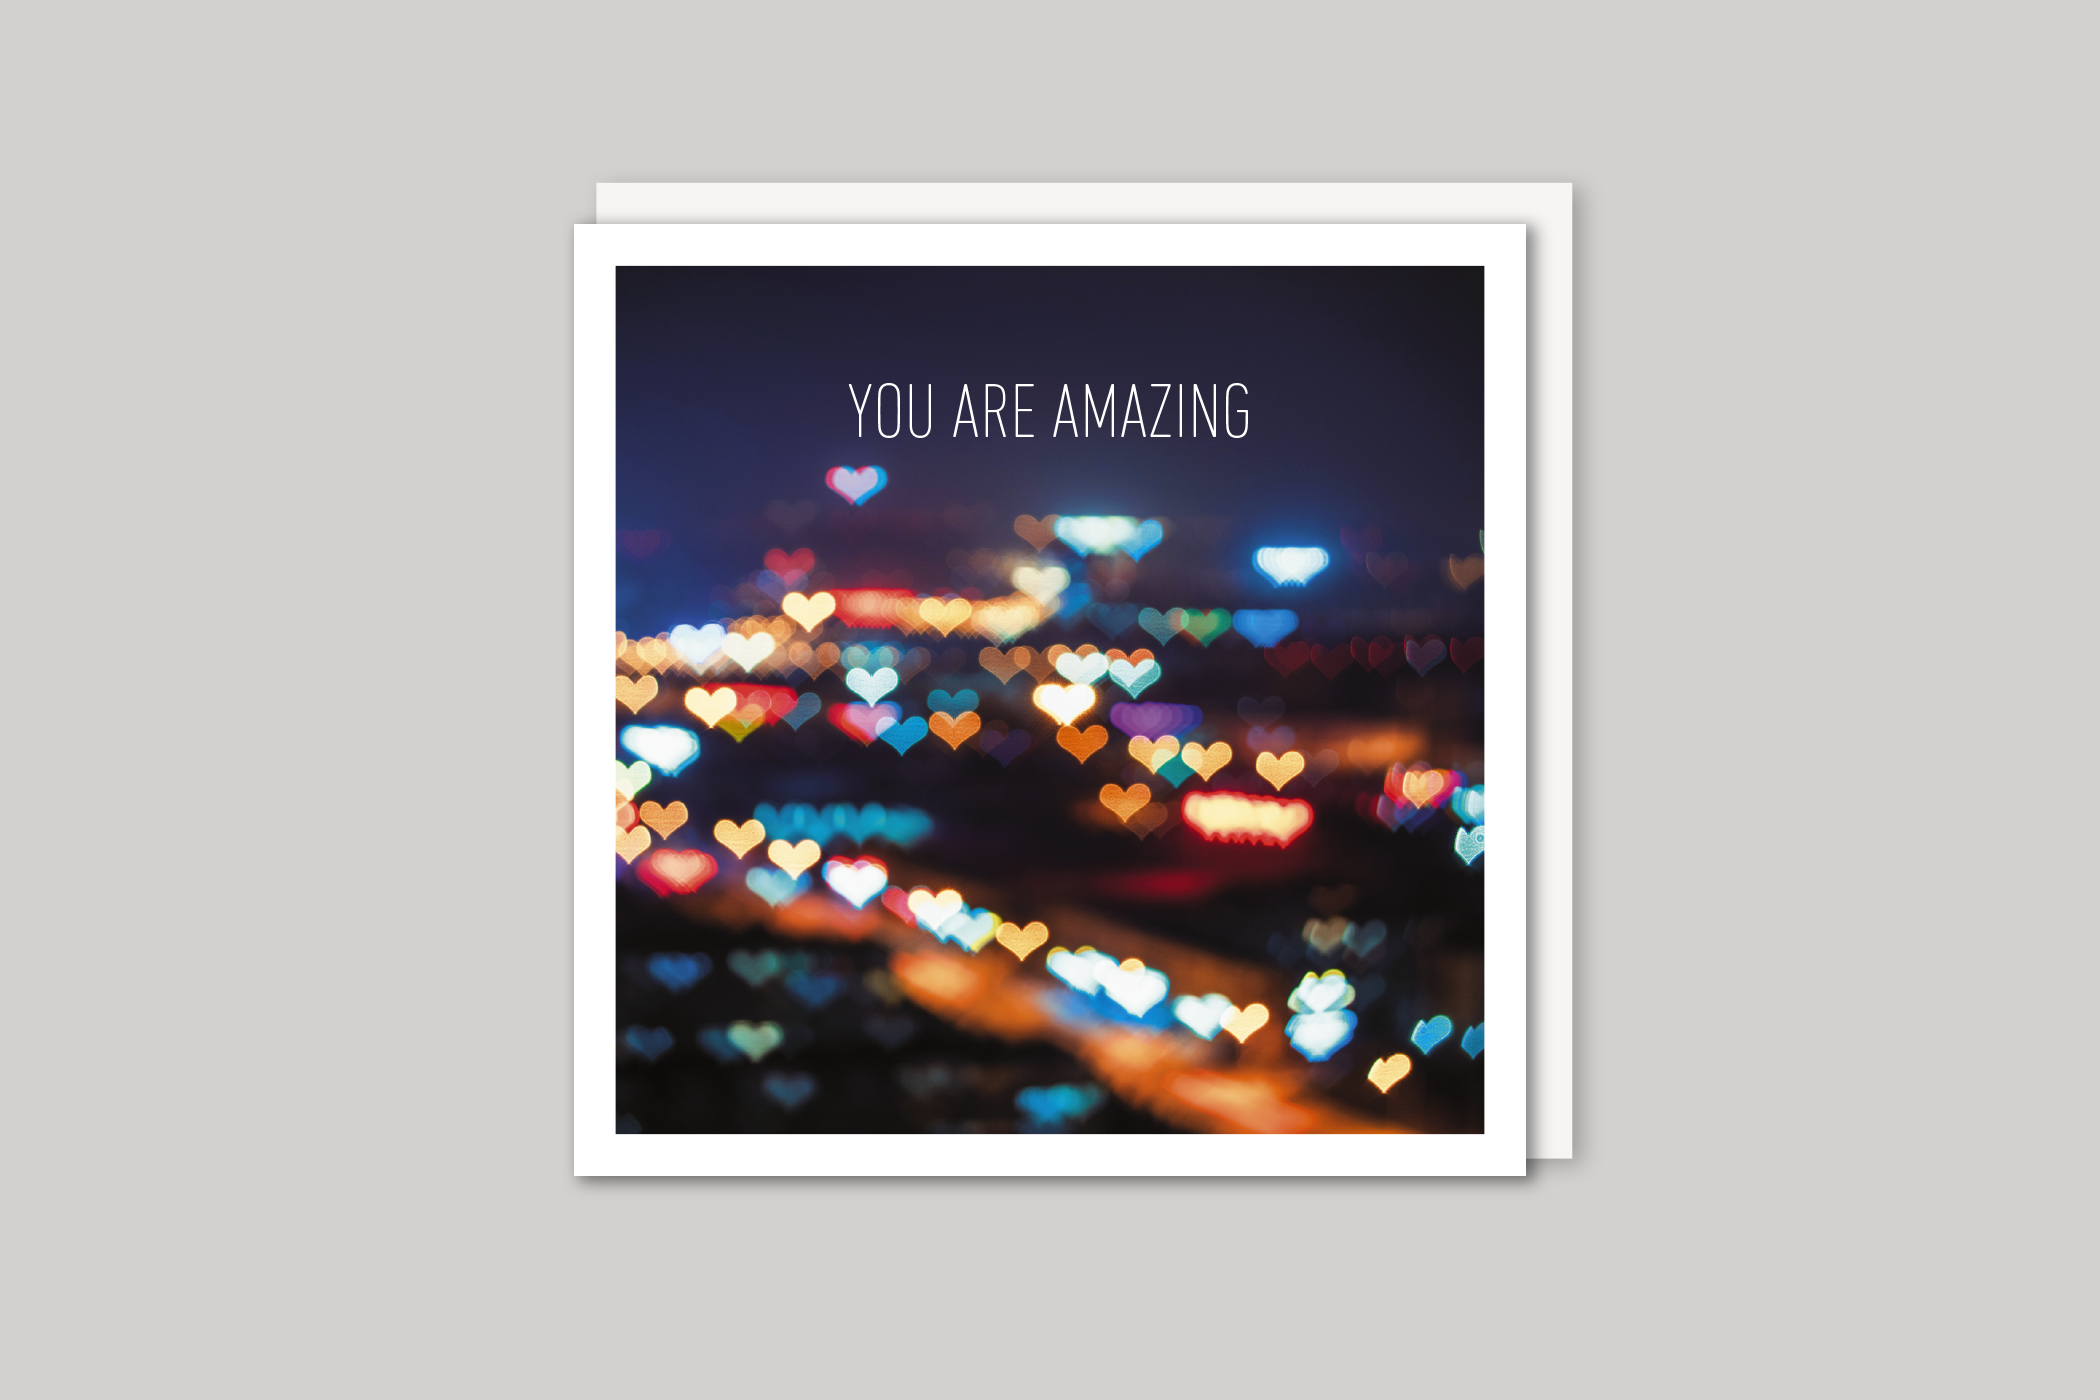 You Are Amazing from Beautiful Days range of contemporary photographic cards by Icon, back page.